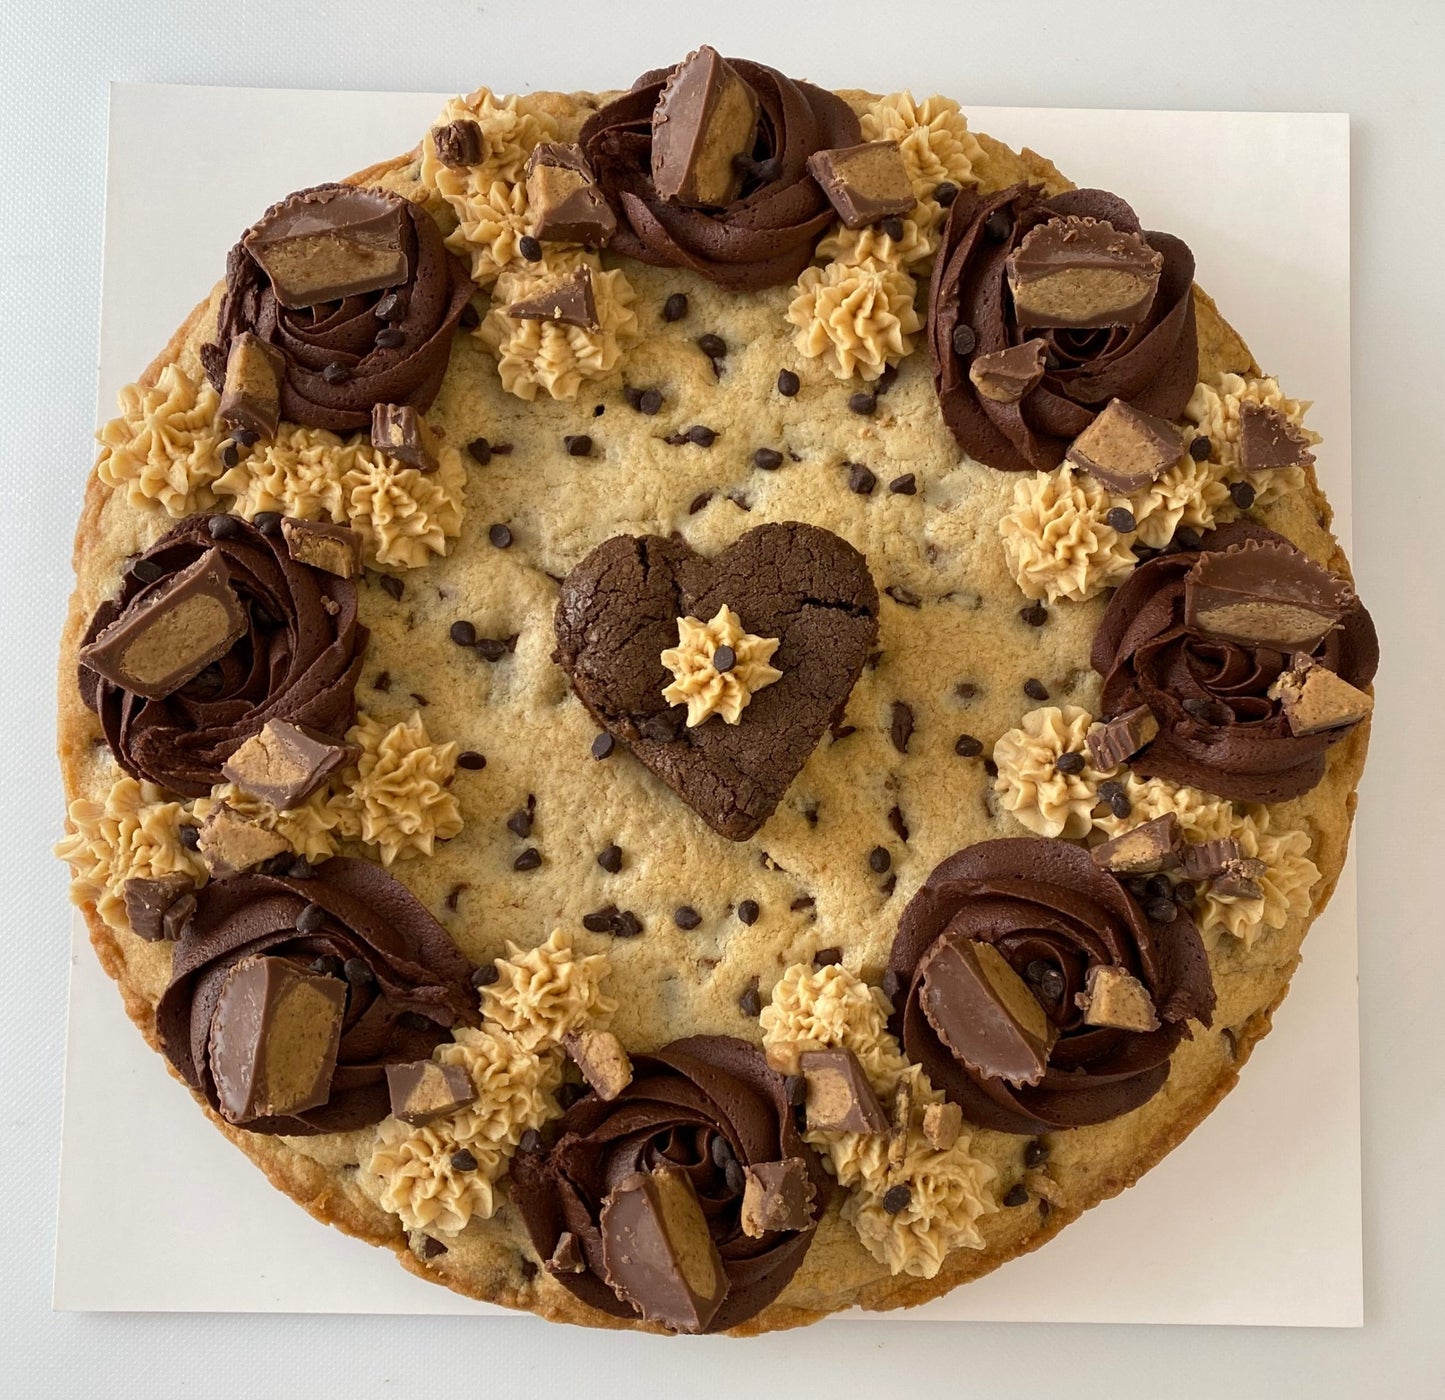 Peanut Butter Chocolate Chip Cookie Cake